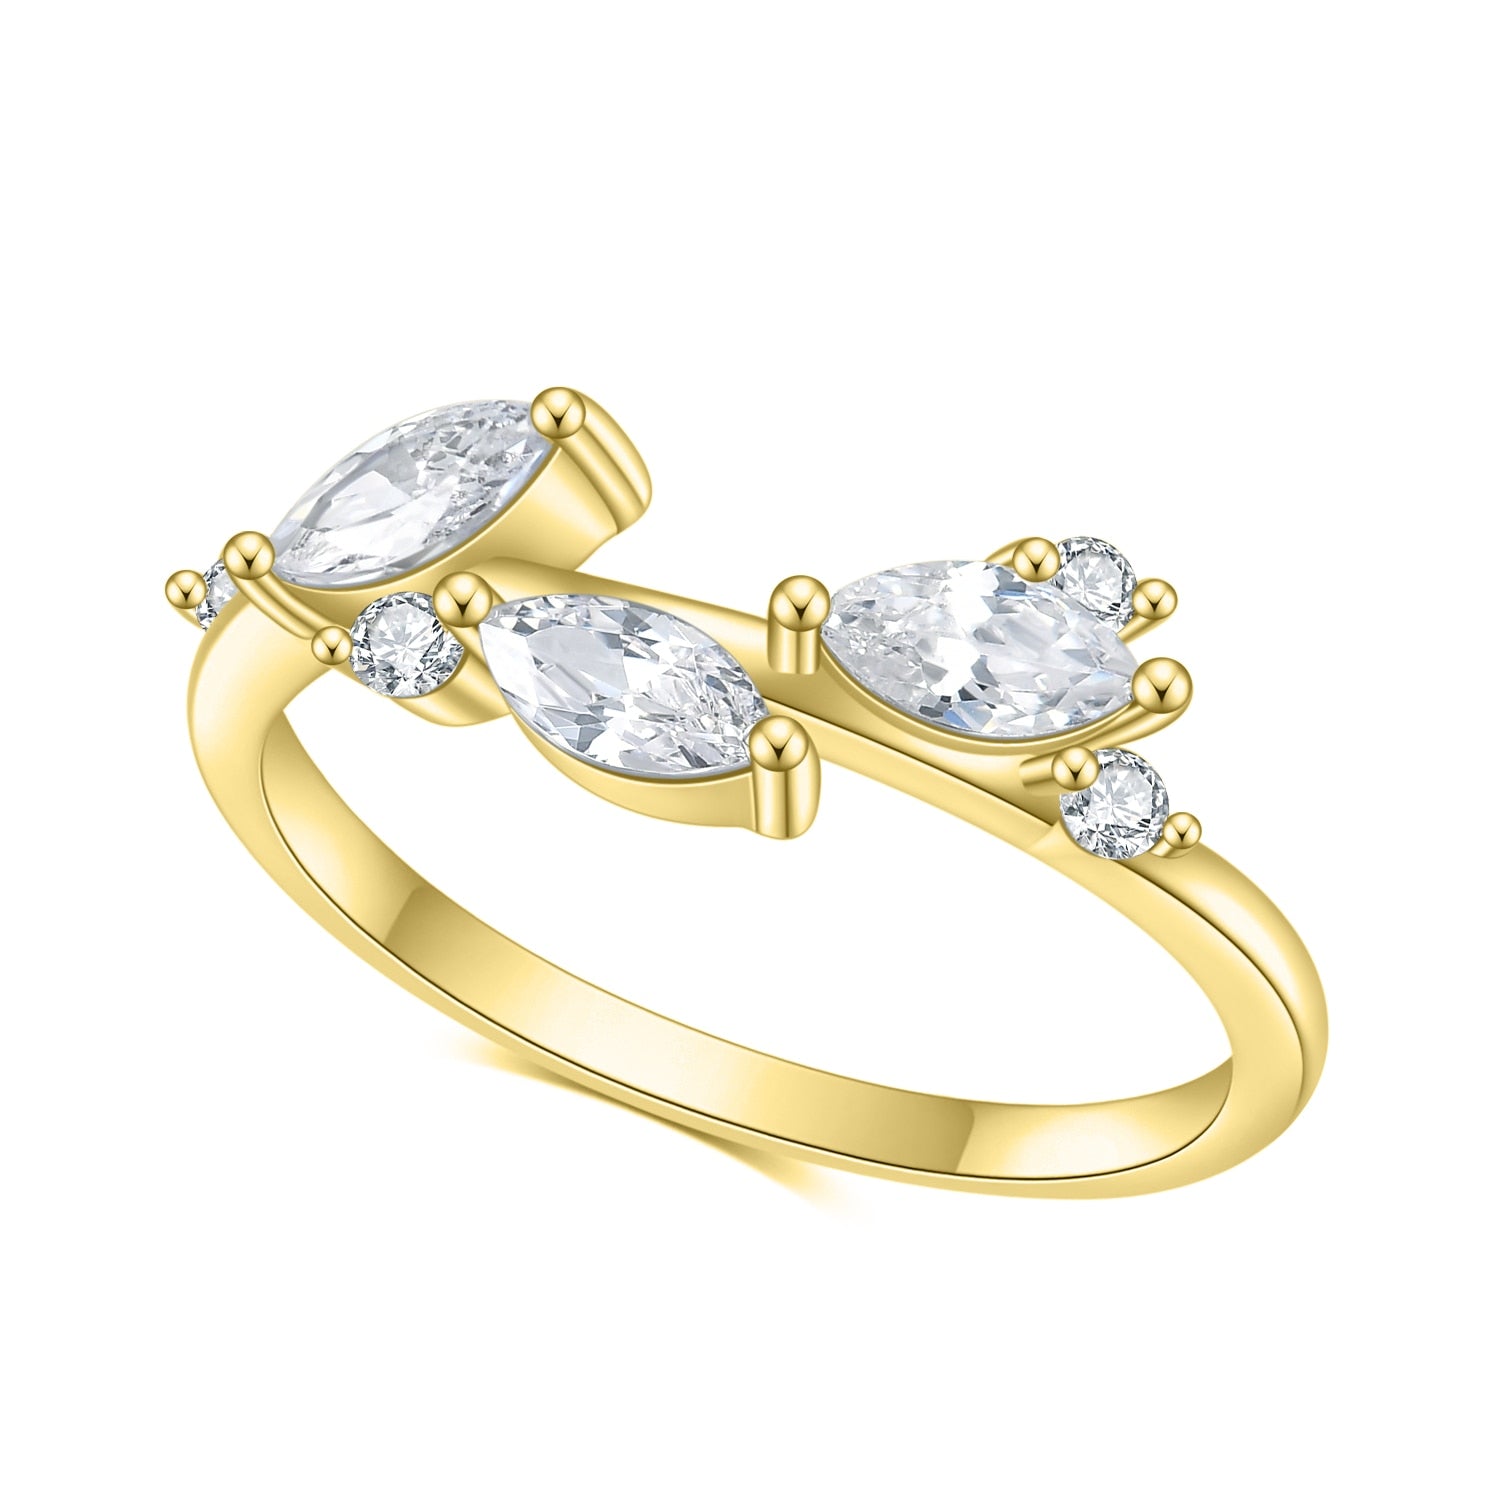 A gold wedding ring with three marquise moissanite set like leaves.